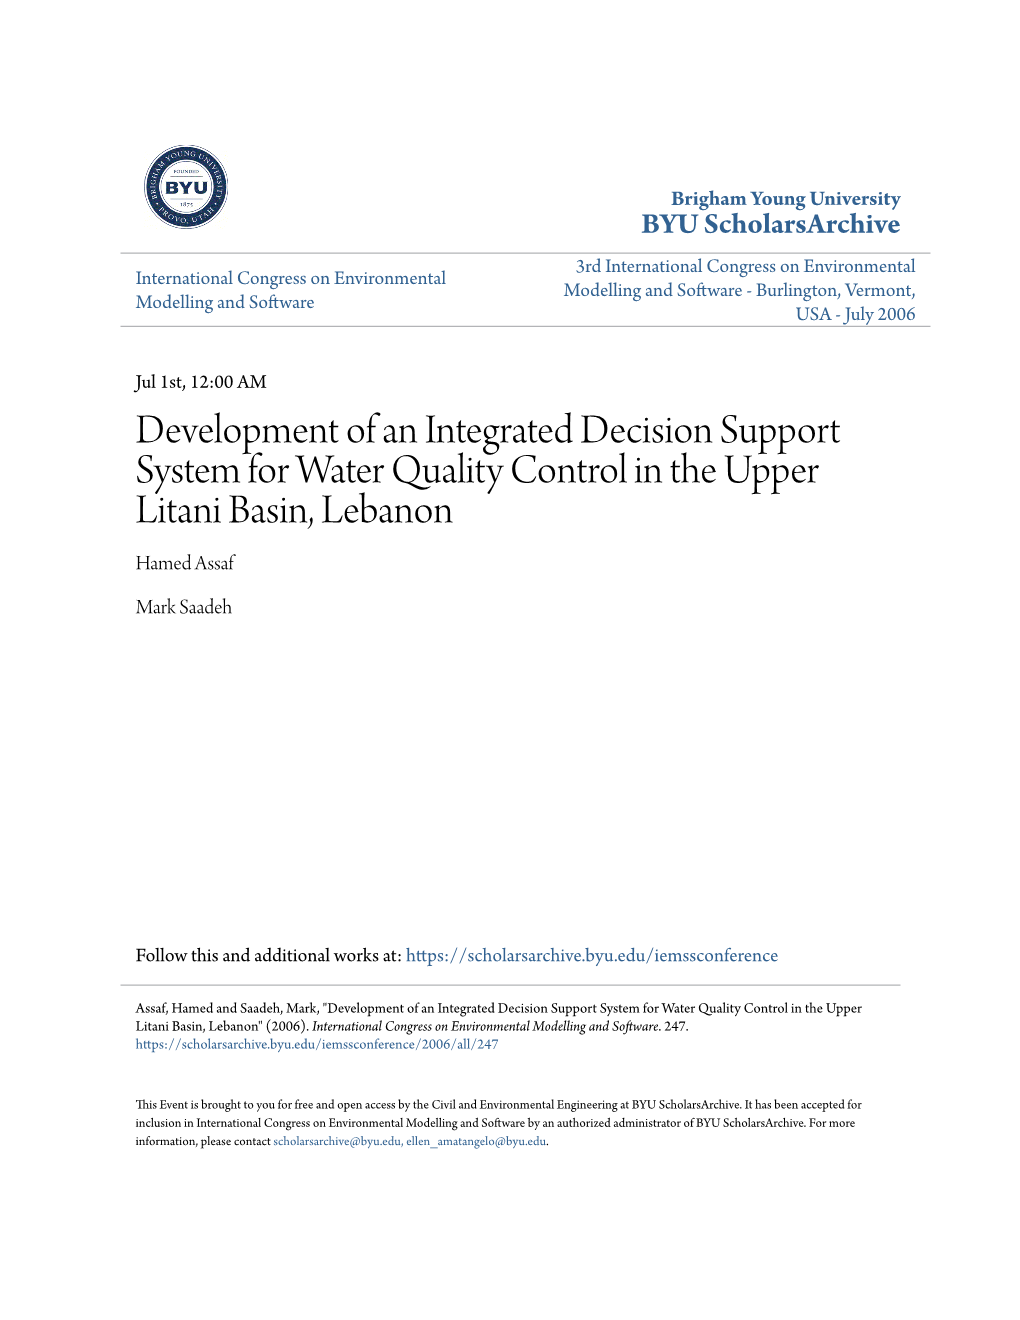 Development of an Integrated Decision Support System for Water Quality Control in the Upper Litani Basin, Lebanon Hamed Assaf